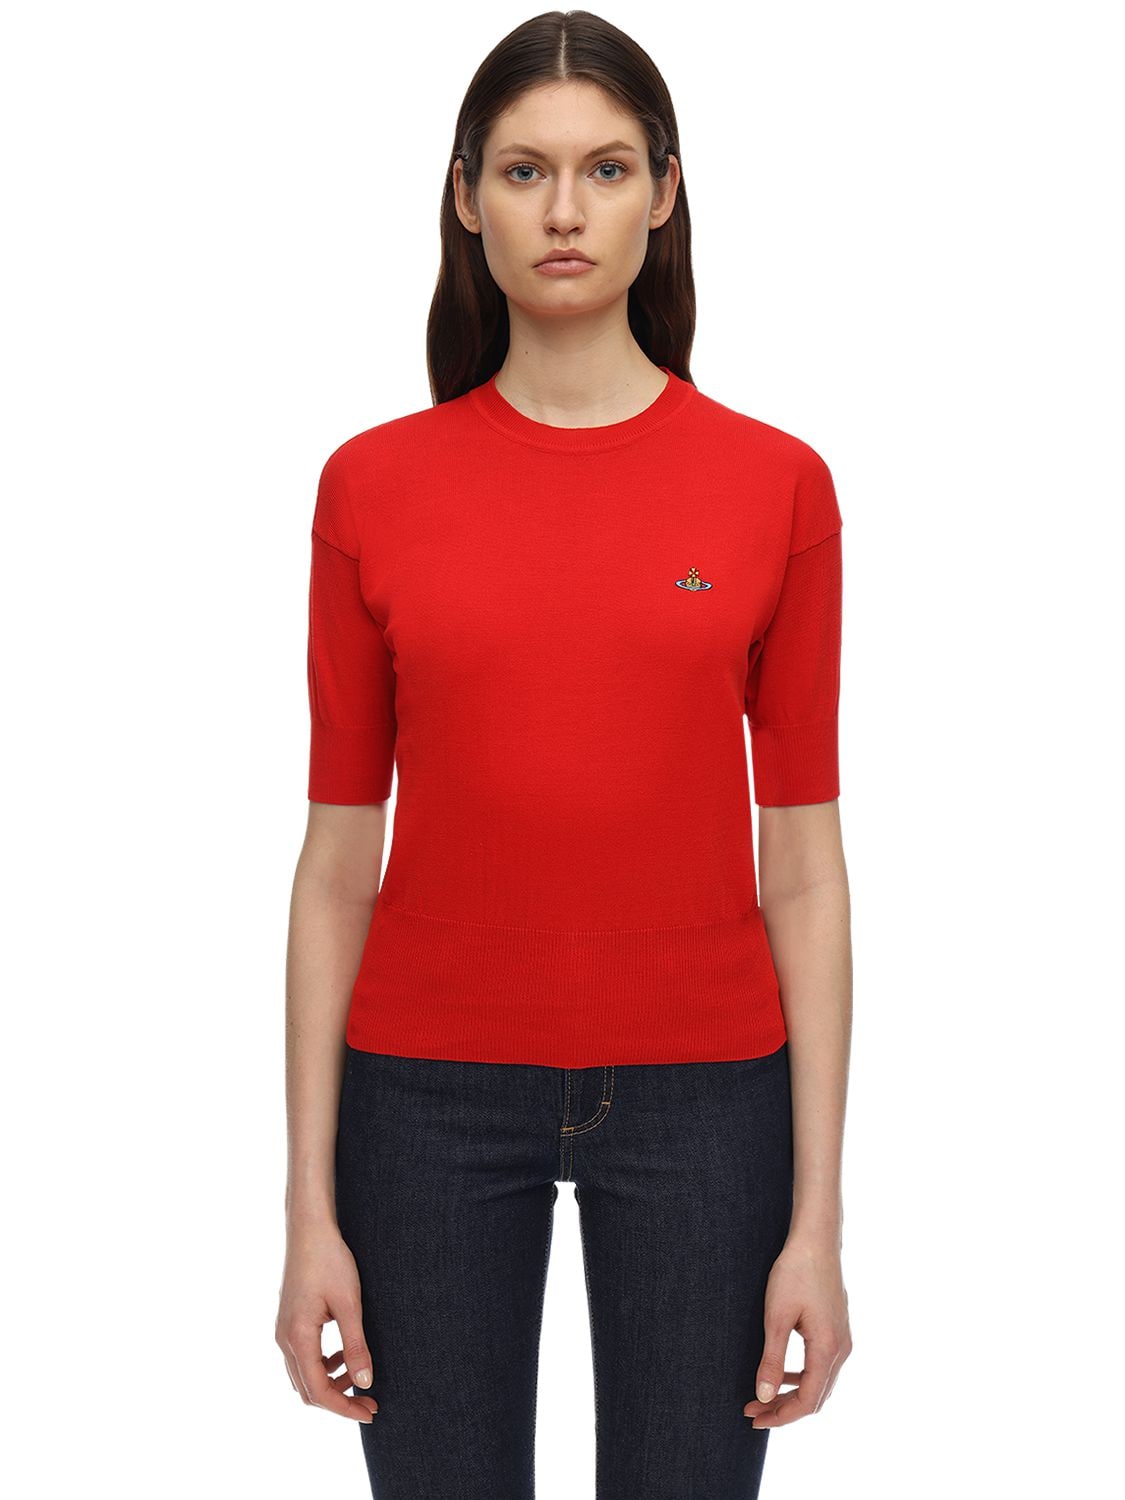 Vivienne Westwood Bea Cotton Knit  Top In Red